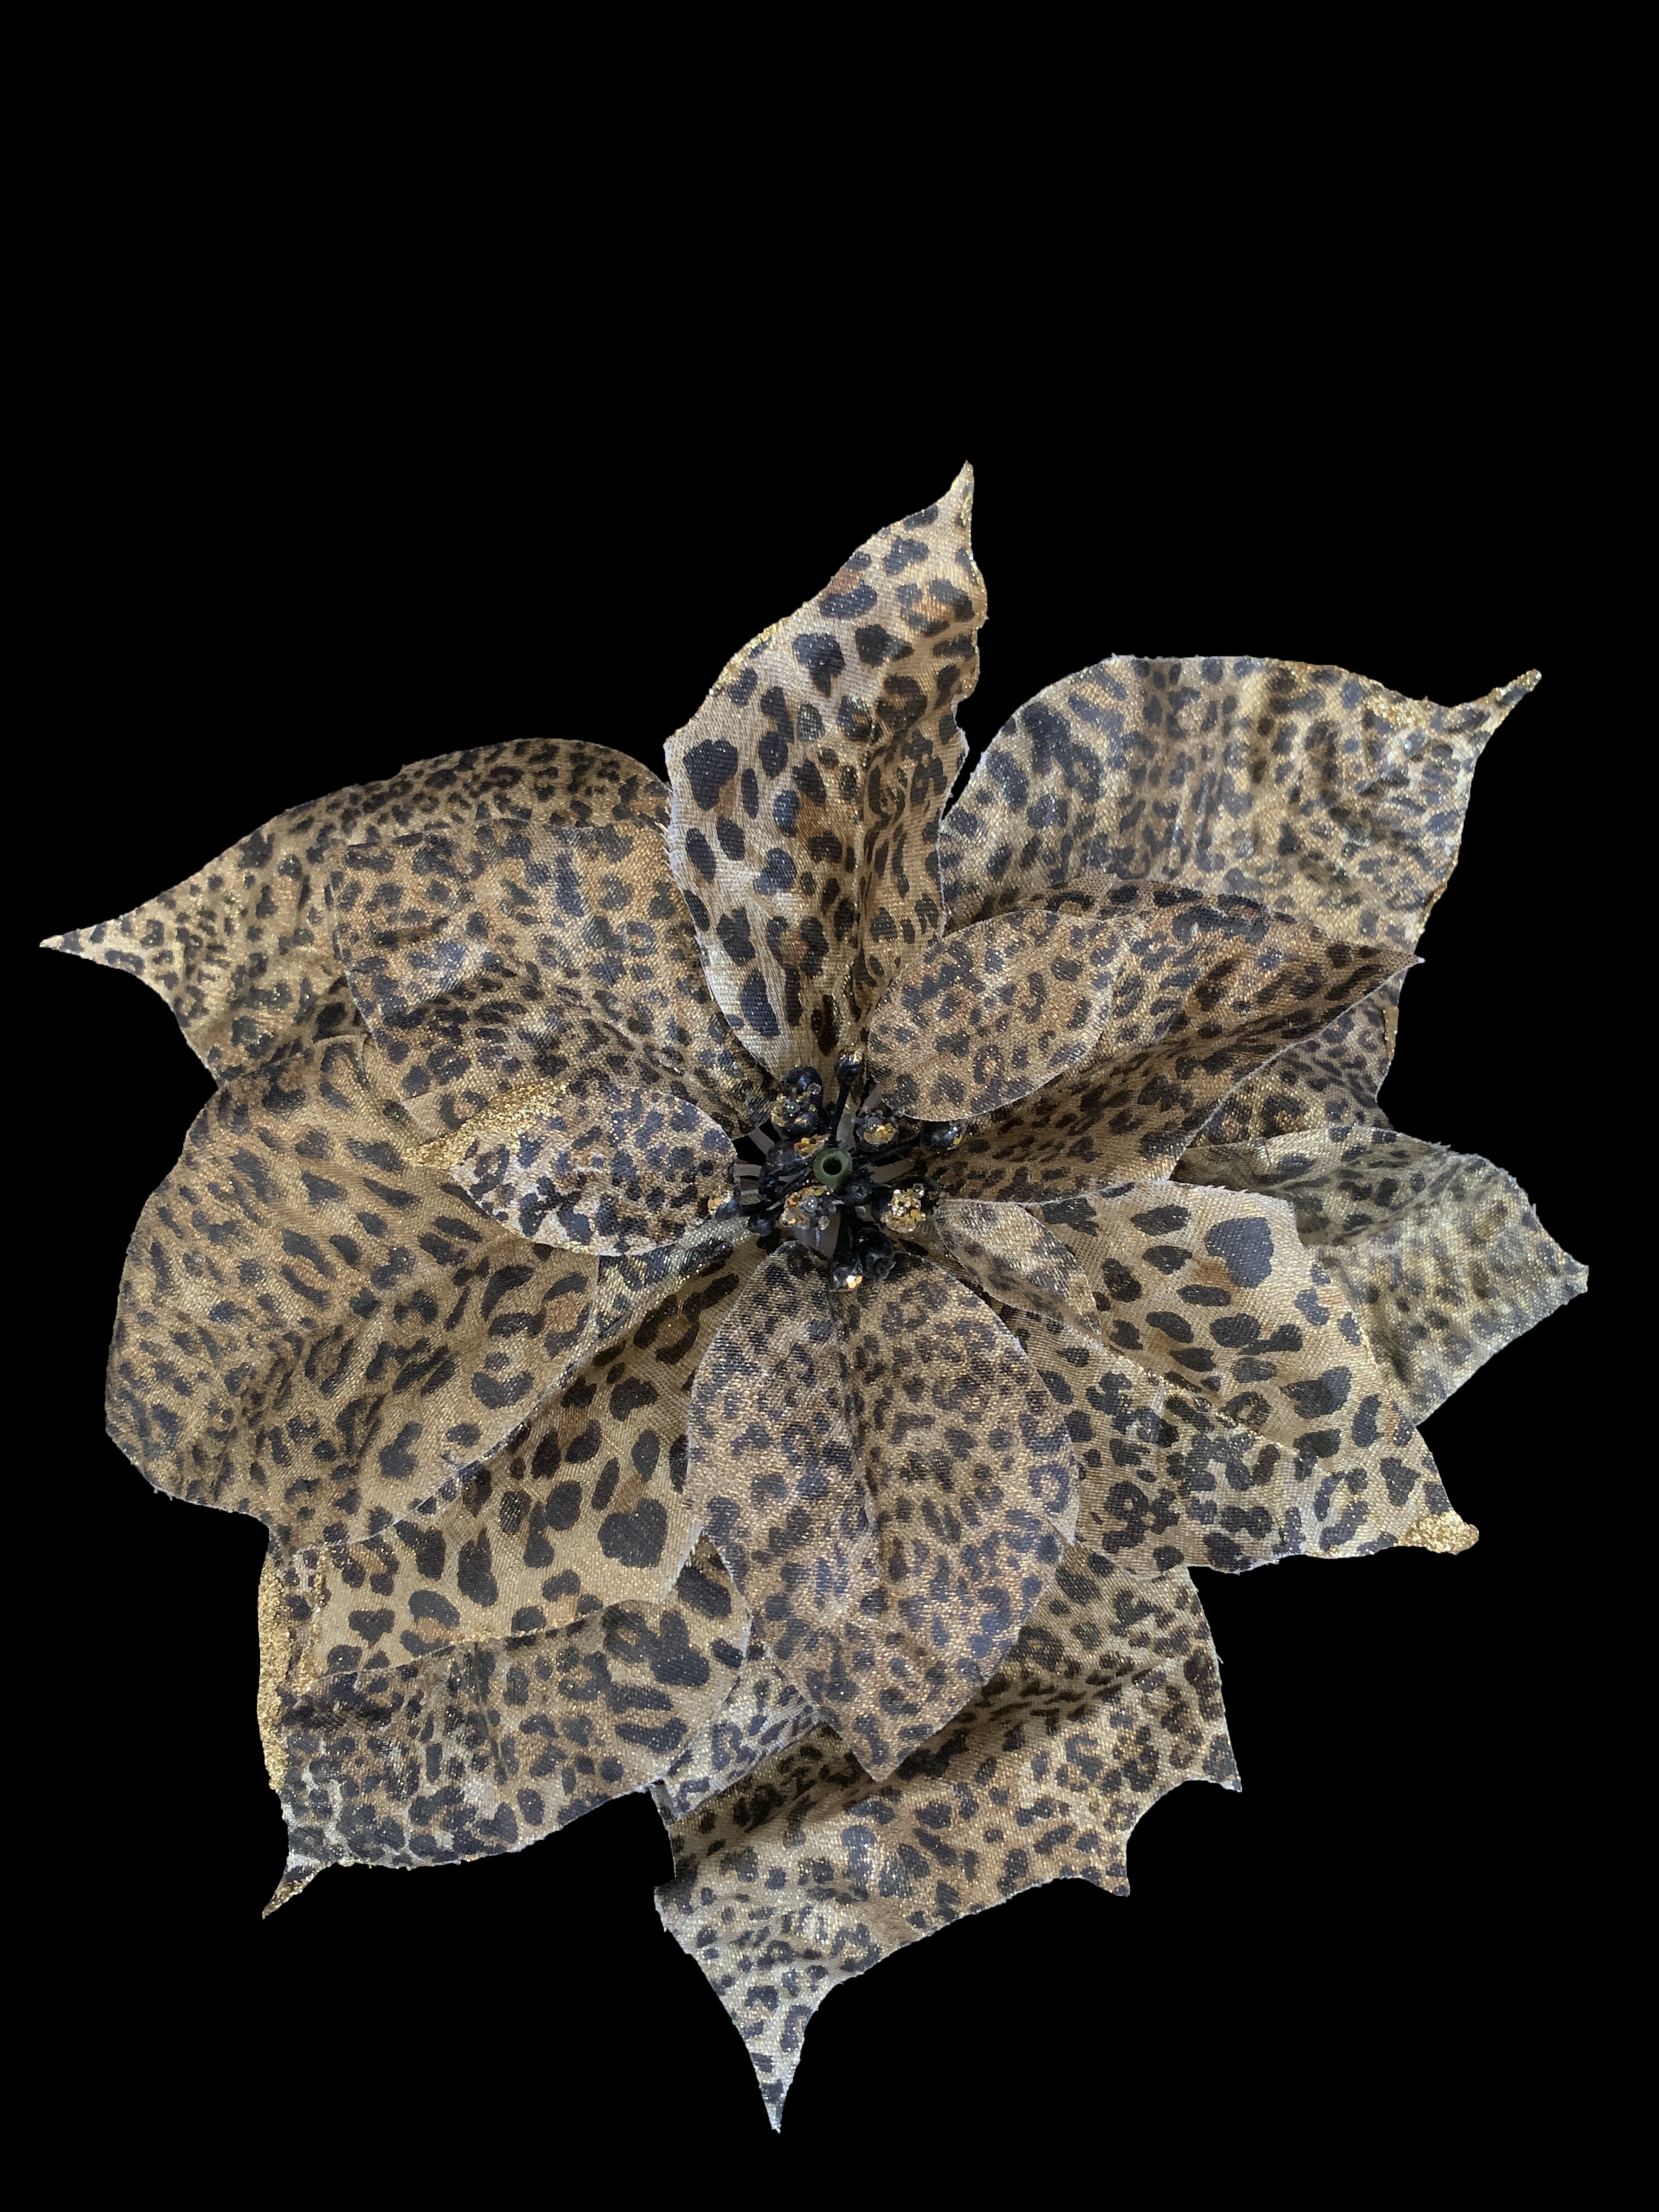 Clip on Leopard Patterned Poinsettia Ornament